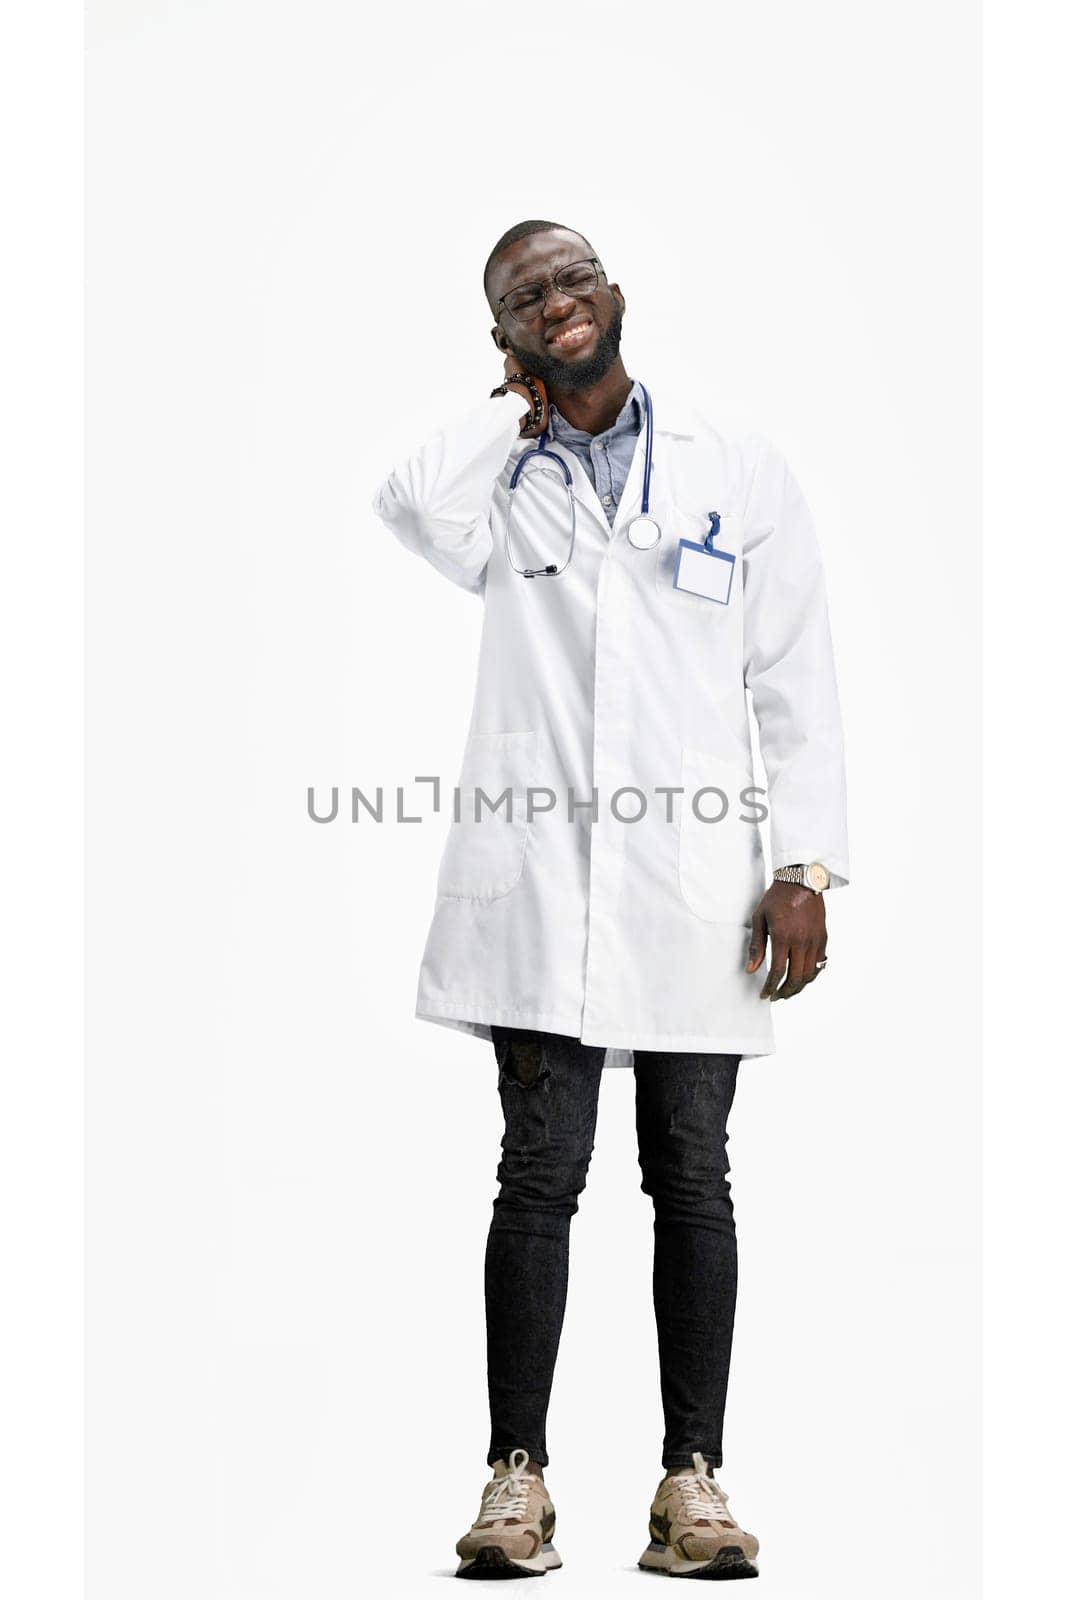 The doctor, in full height, on a white background, tired.